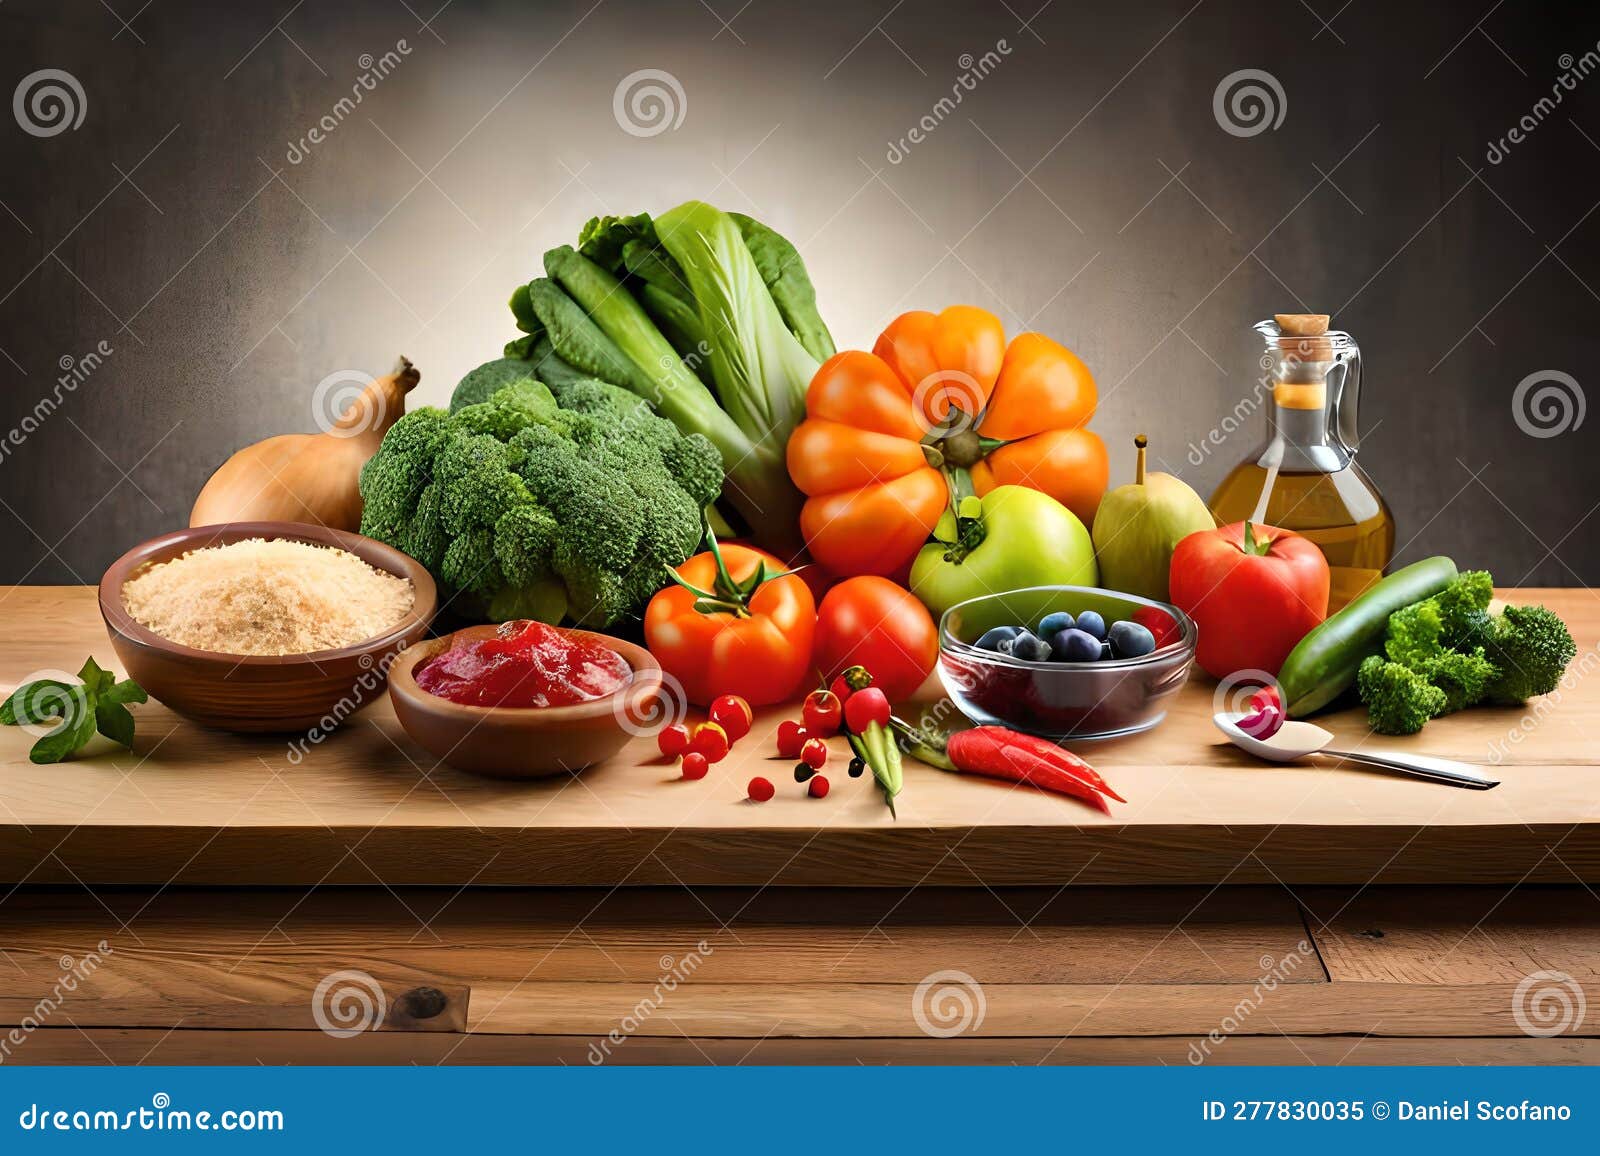 Vegetables Forming a Human Body Metabolism and Nutrition, Eating Diet Food  for Energy and Digestion. Created Stock Illustration - Illustration of  amino, concept: 277830035